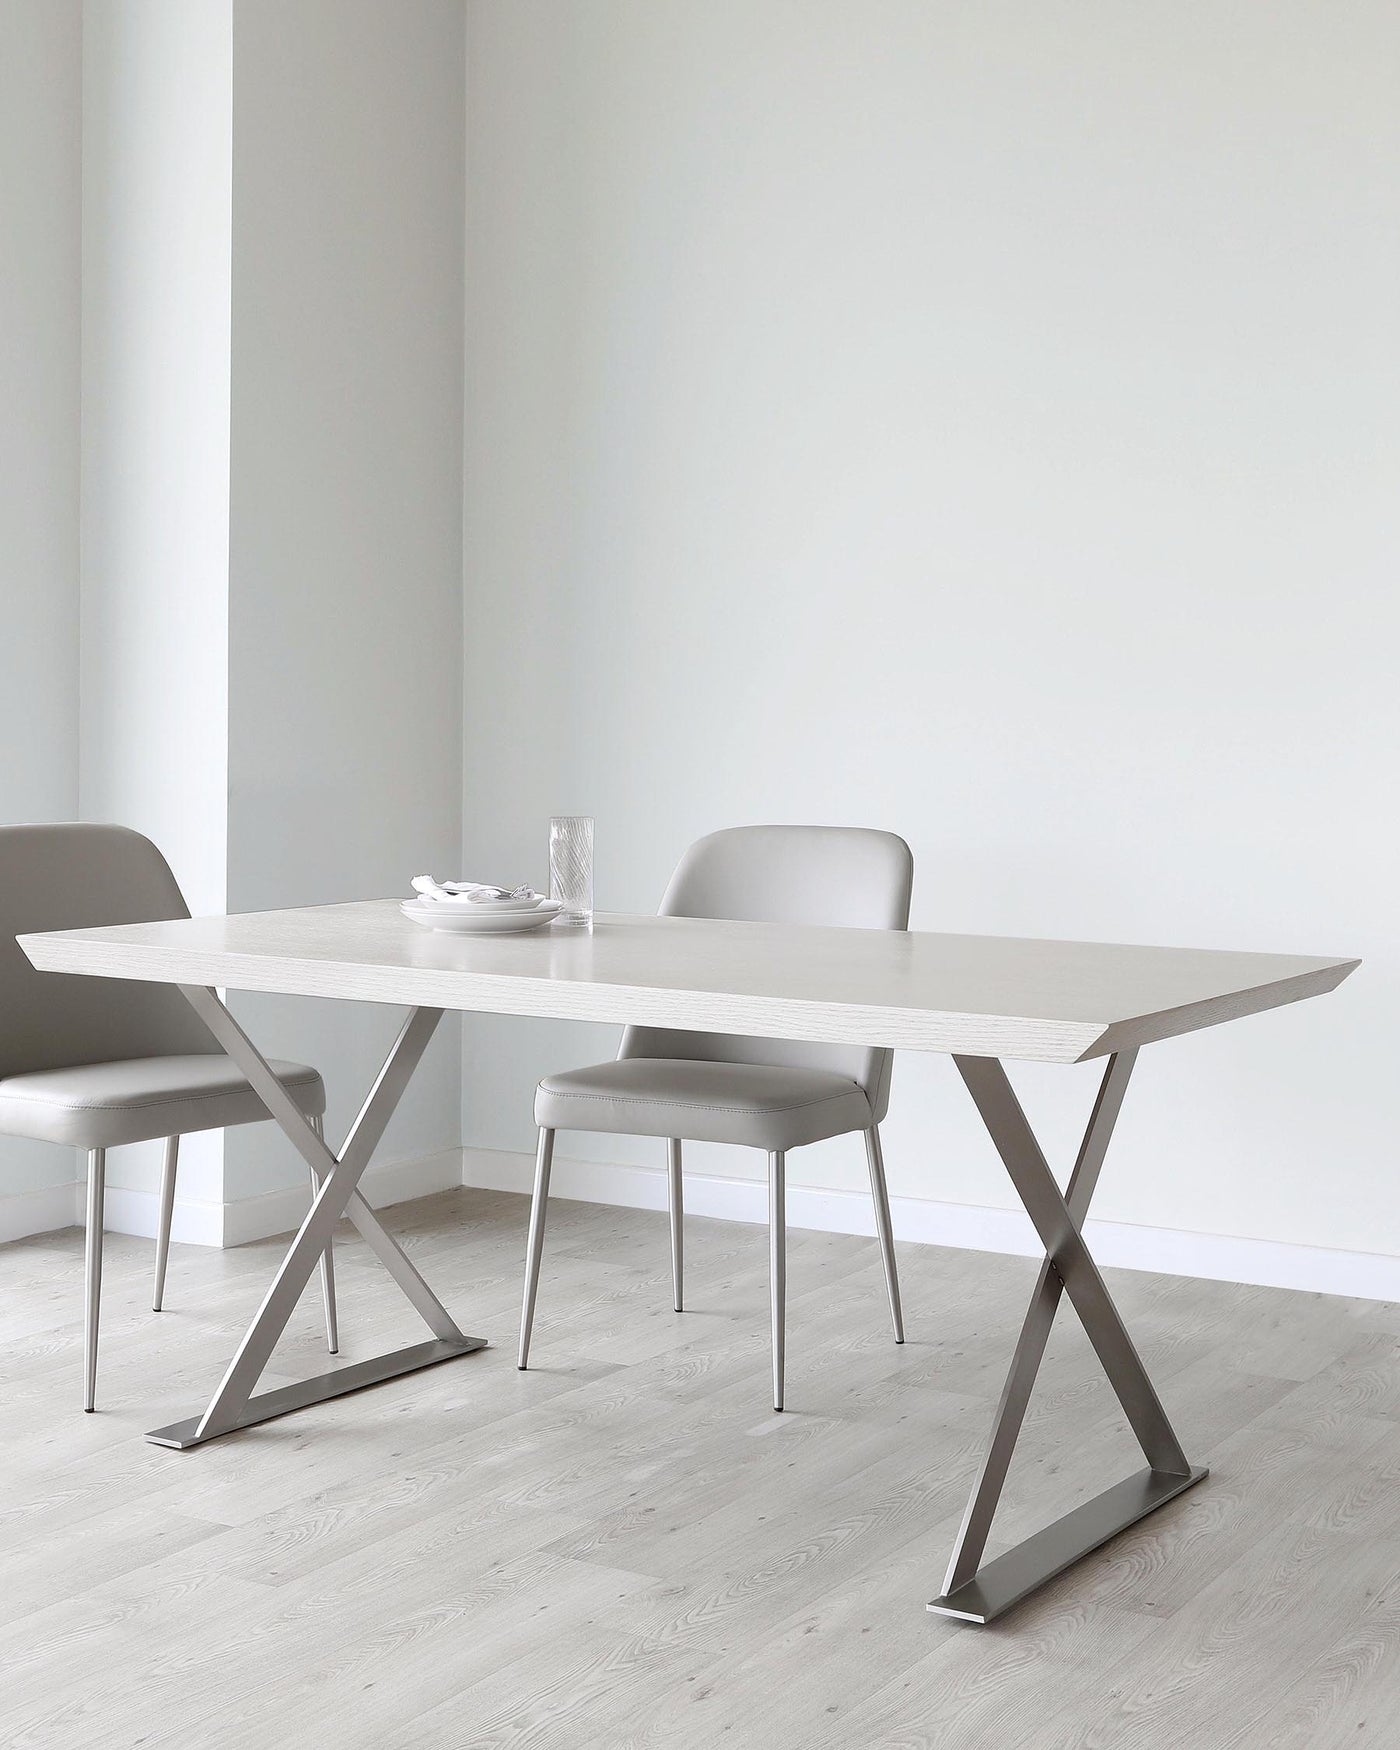 A modern minimalist dining set featuring a rectangular table with a light wood grain finish and distinctive X-shaped metallic legs. Two sleek chairs with padded seats and backrests, upholstered in a taupe fabric, complement the table, standing on slender metal legs. The set is displayed in a room with light grey walls and pale wooden flooring, emphasizing a clean and contemporary aesthetic.